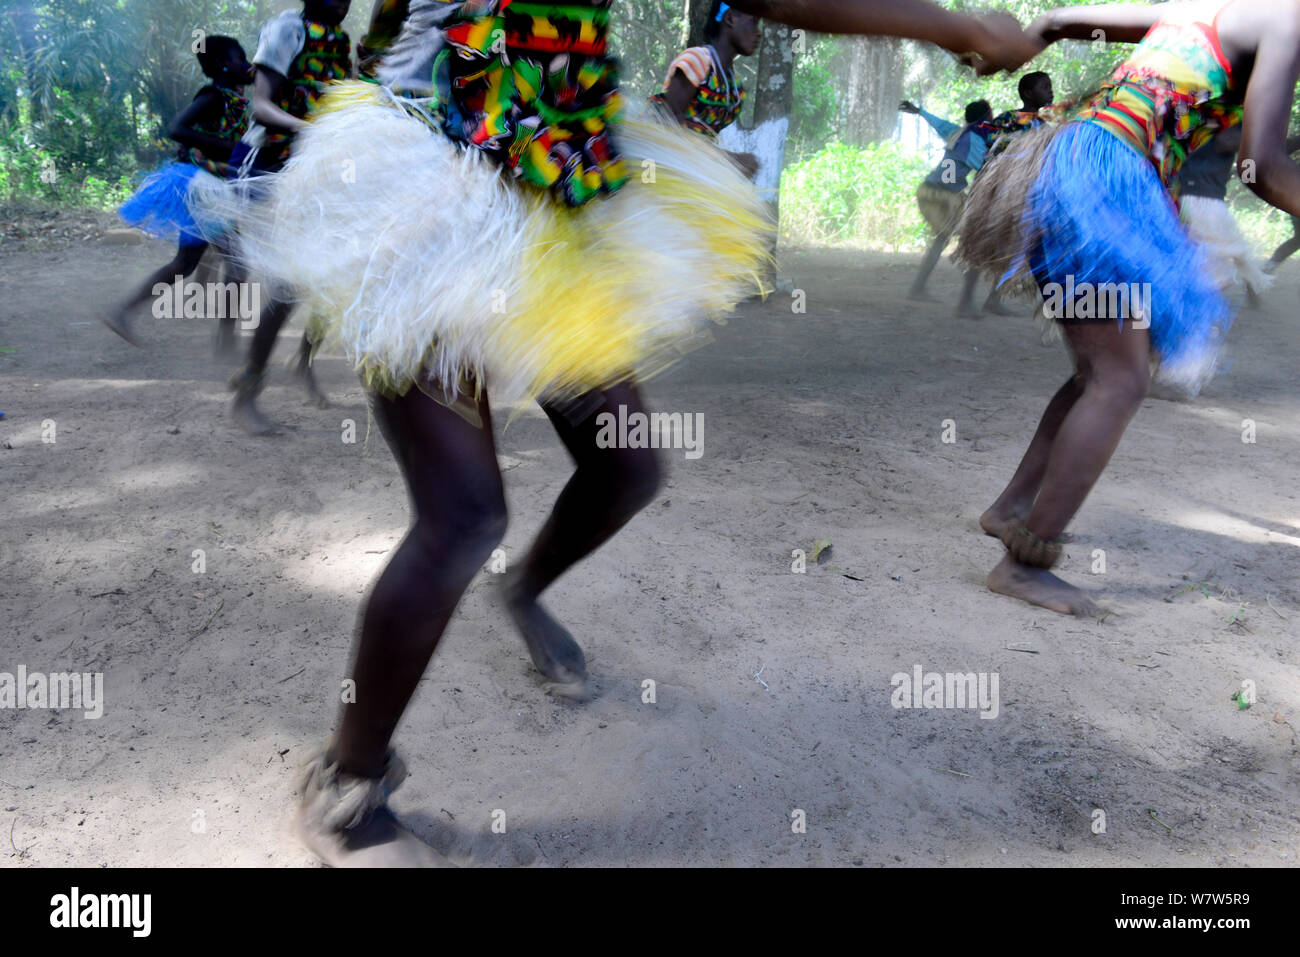 Girls dancing in a traditional Susso dance. Catesse village, Cantanhez National Park, Guinea-Bissau, December 2013. Stock Photo